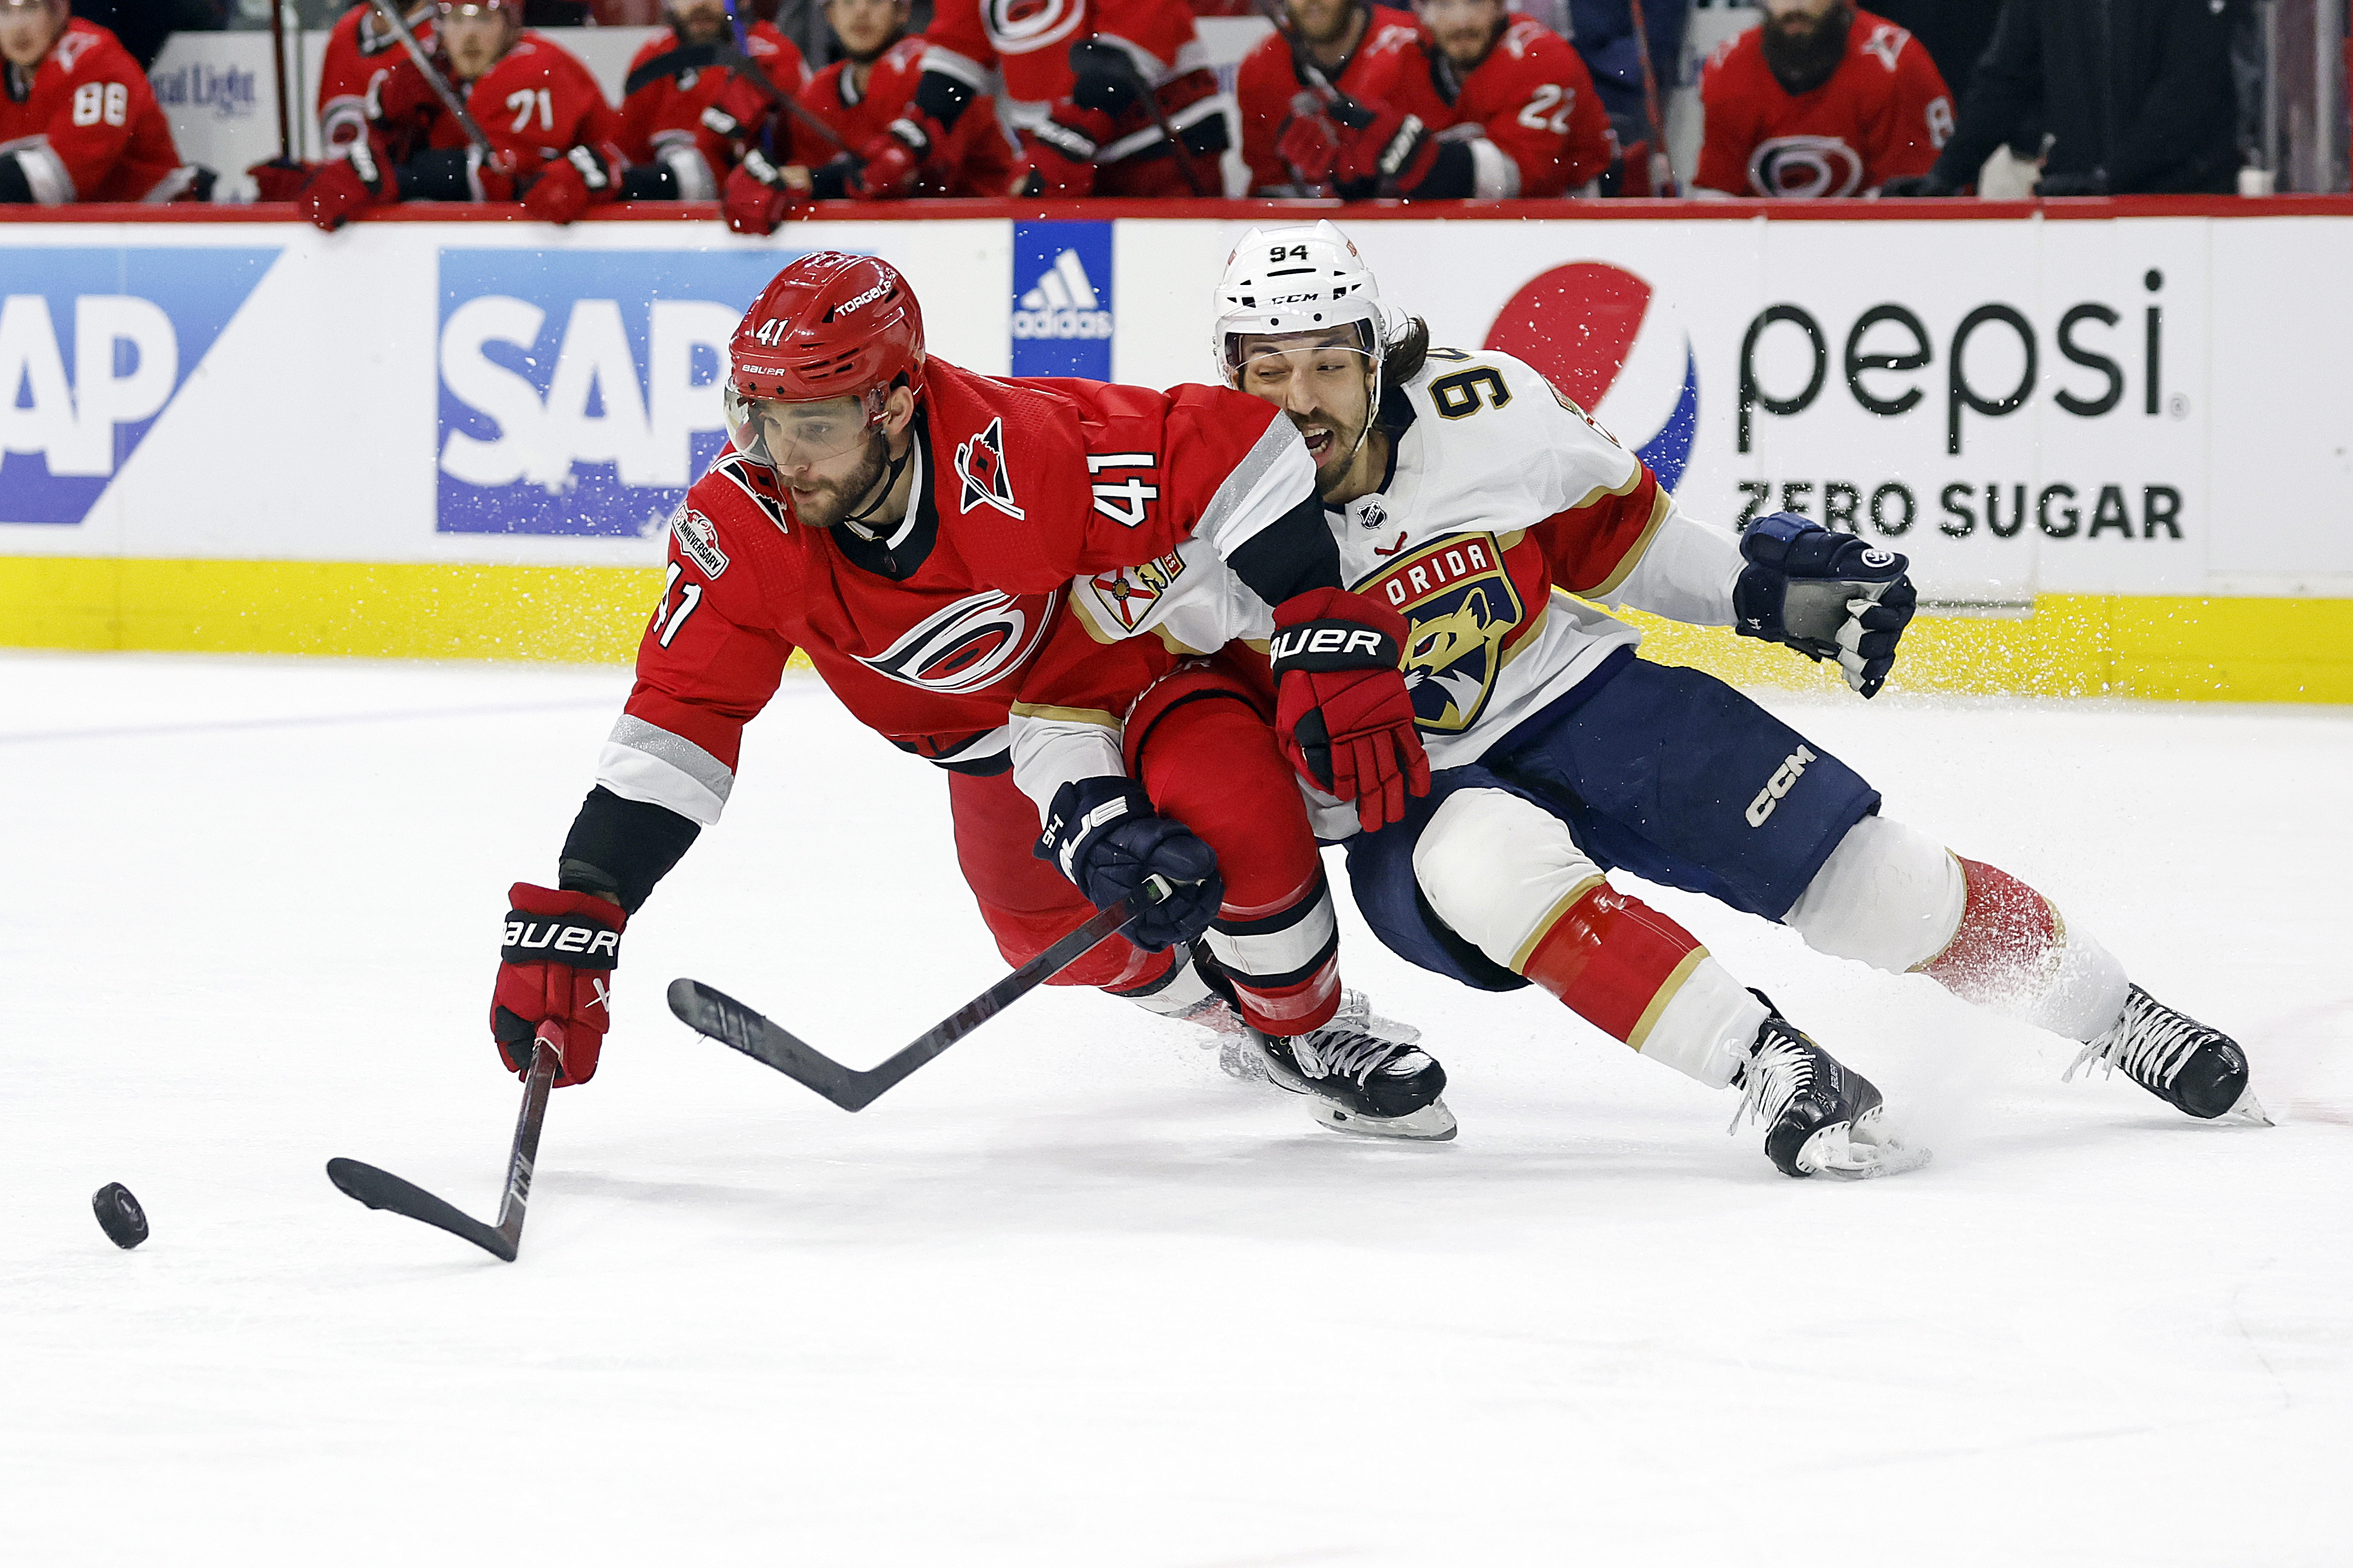 NHL roundup: Carter Verhaeghe nets career-best 4 goals in Panthers' win